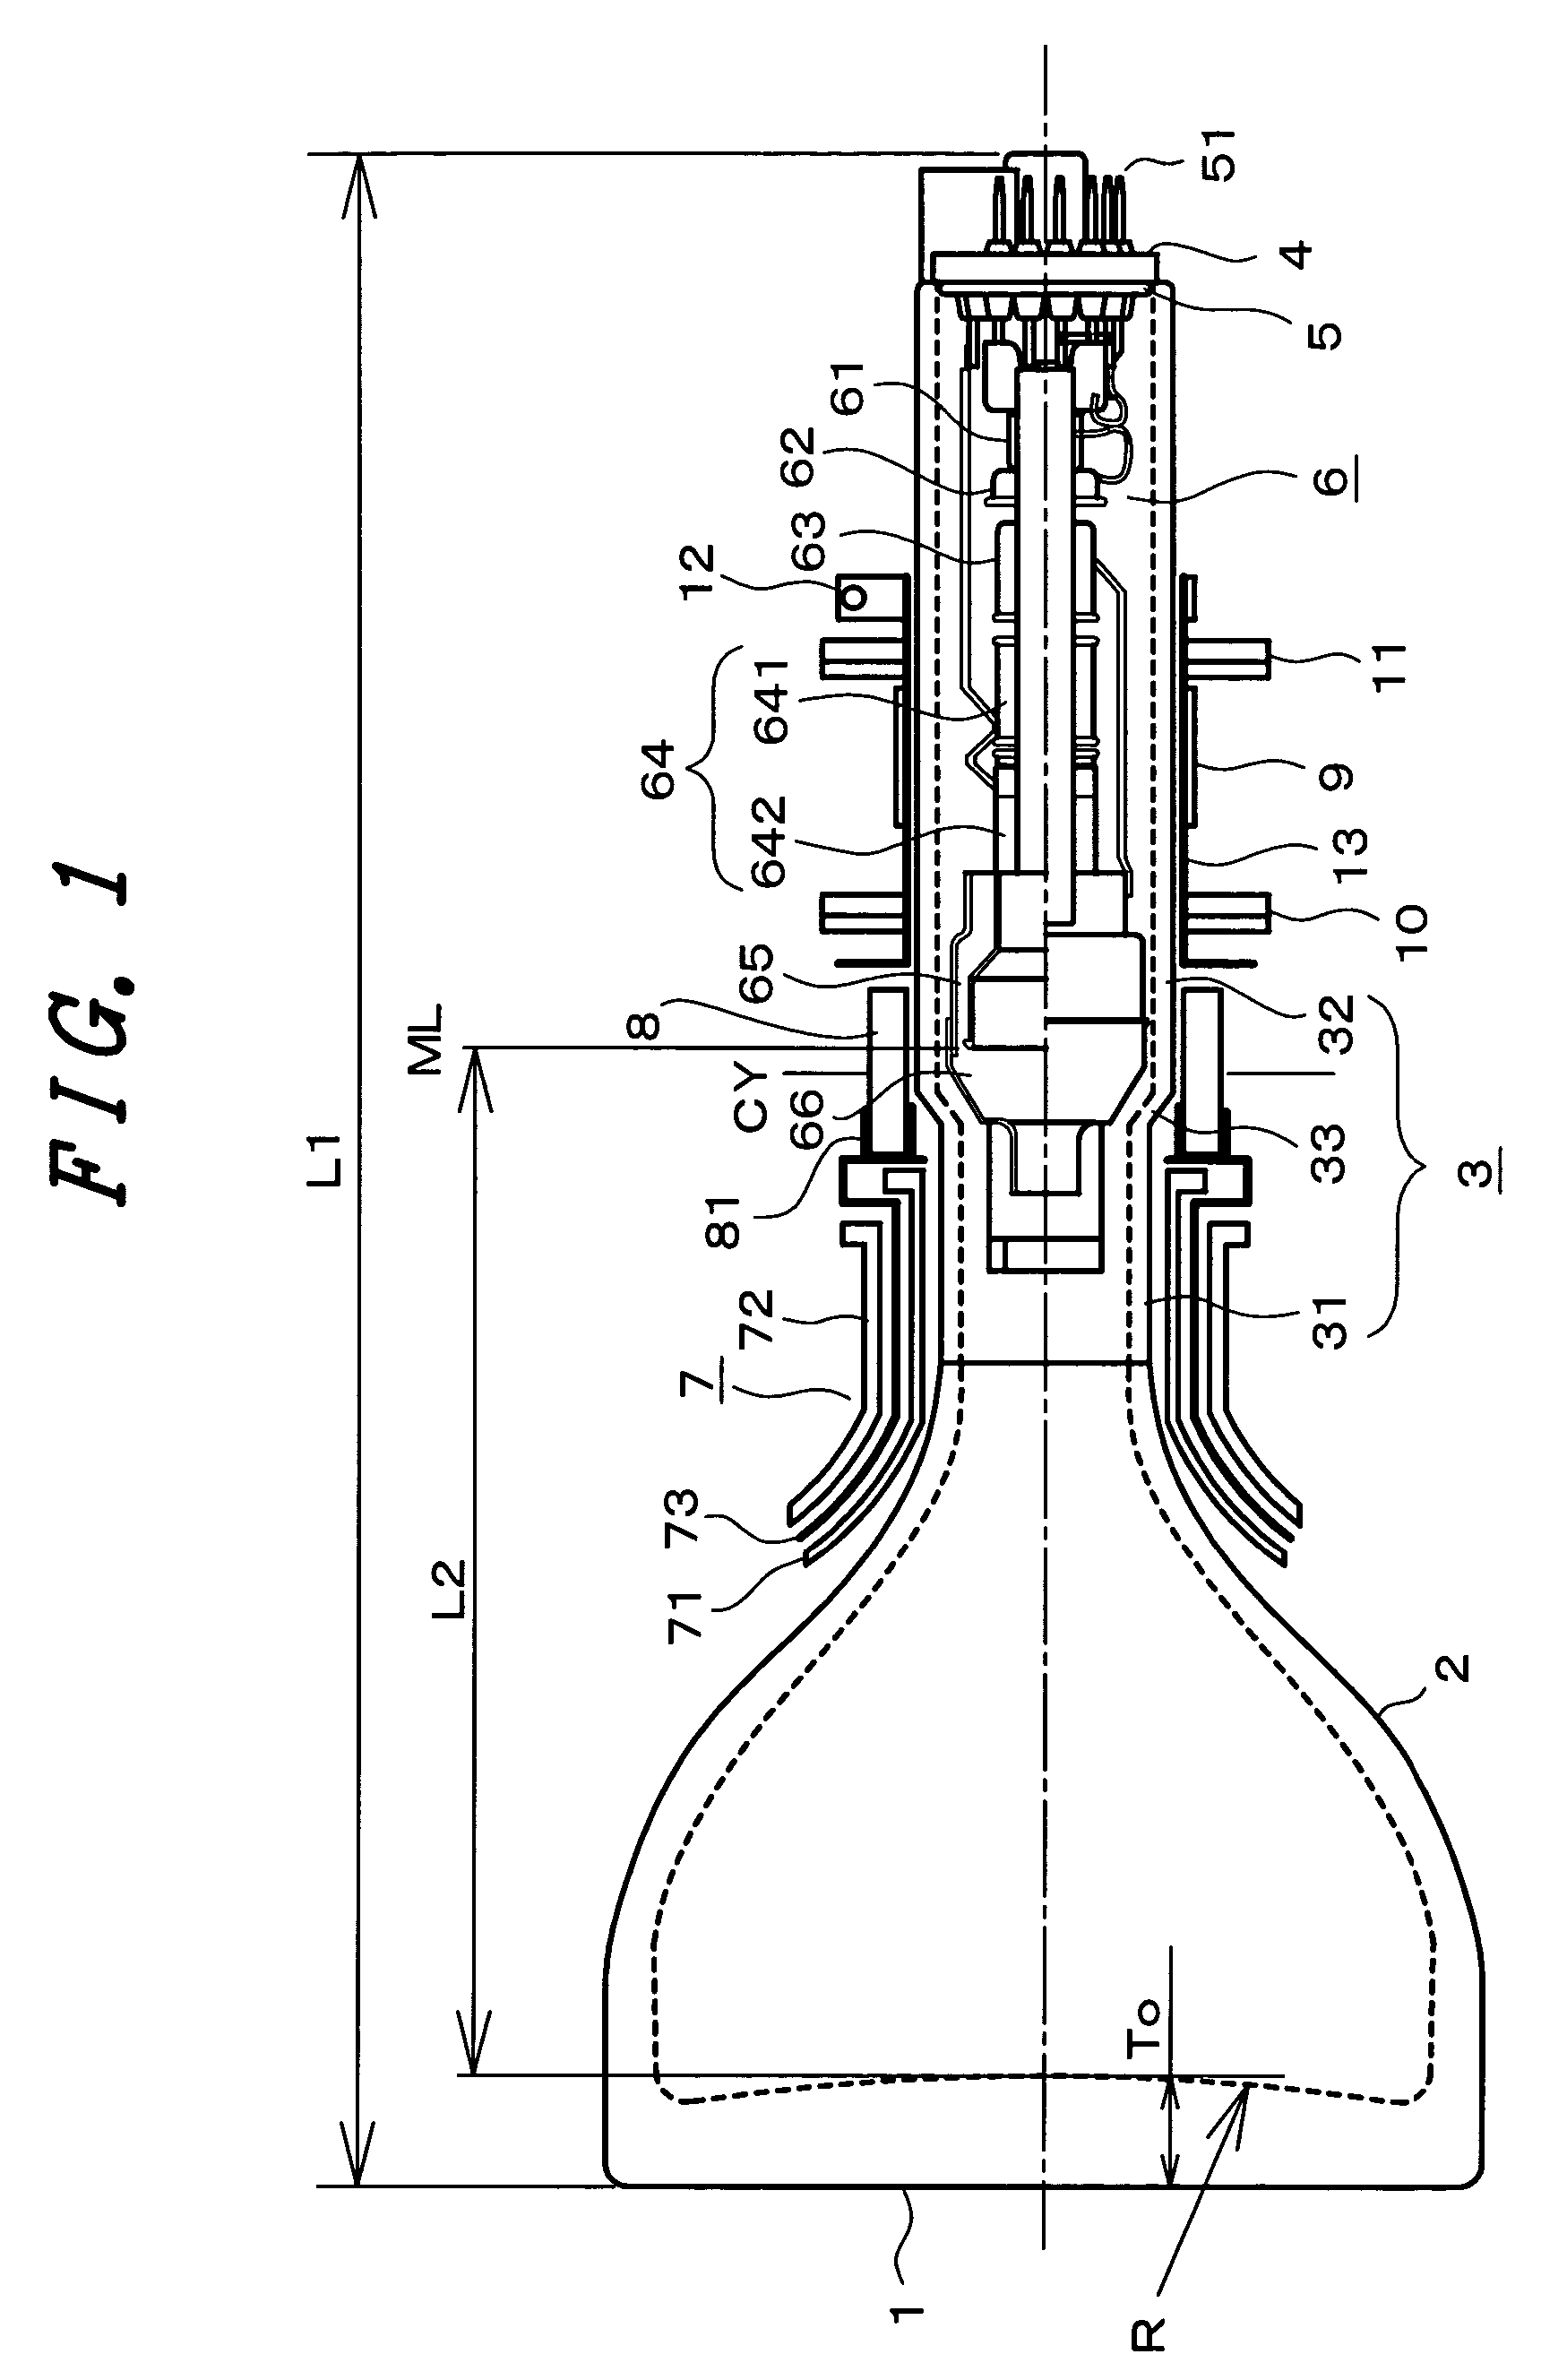 Projection type cathode ray tube device